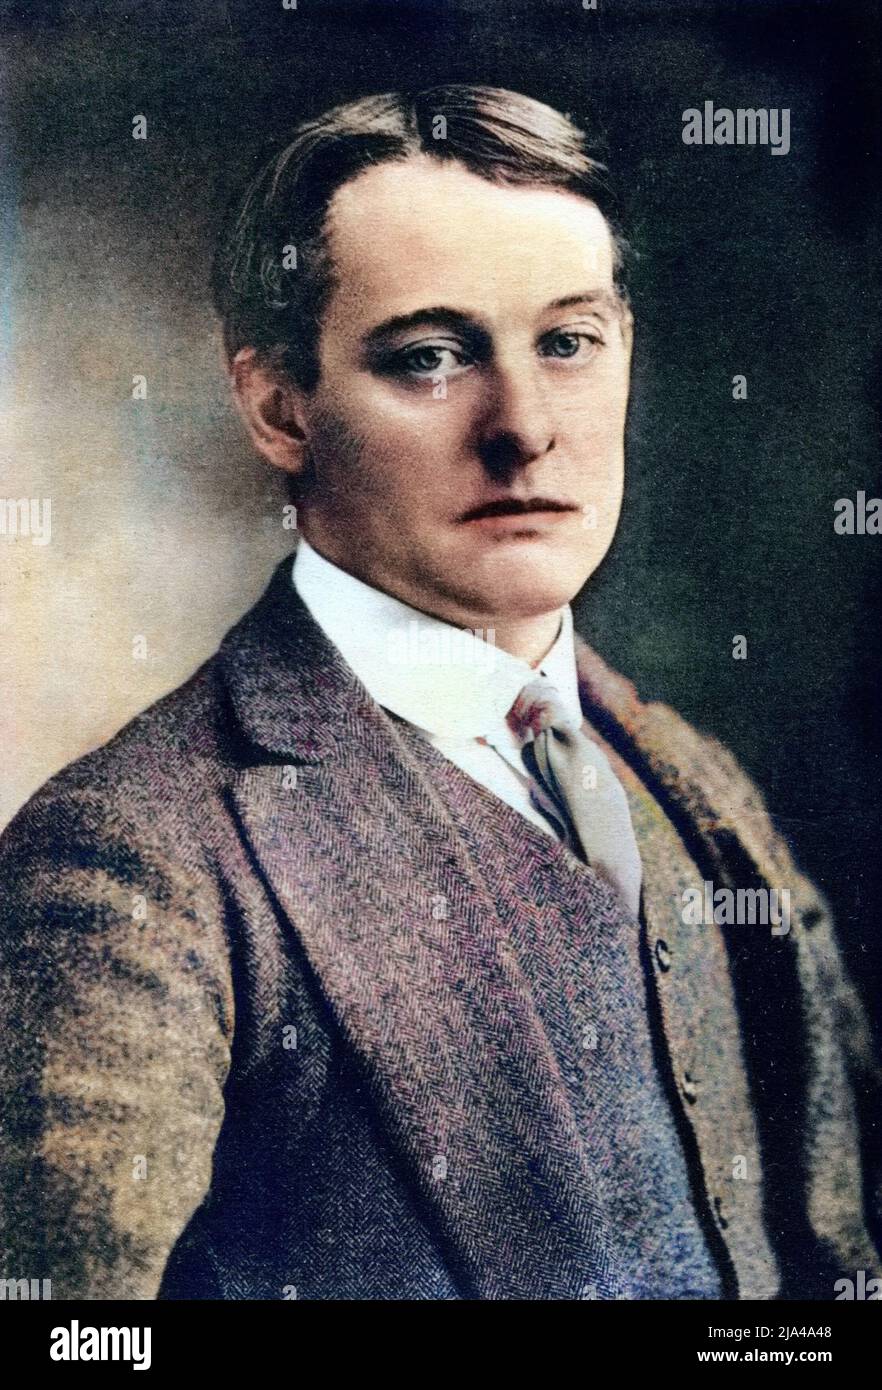 Portrait de l'ecrivain et traducteur britannique Alfred Douglas (1870-1945) - Lord Alfred Bruce Douglas (1870 – 1945), nicknamed Bosie - English author, poet and translator, better known as the friend and lover of writer Oscar Wilde Stock Photo